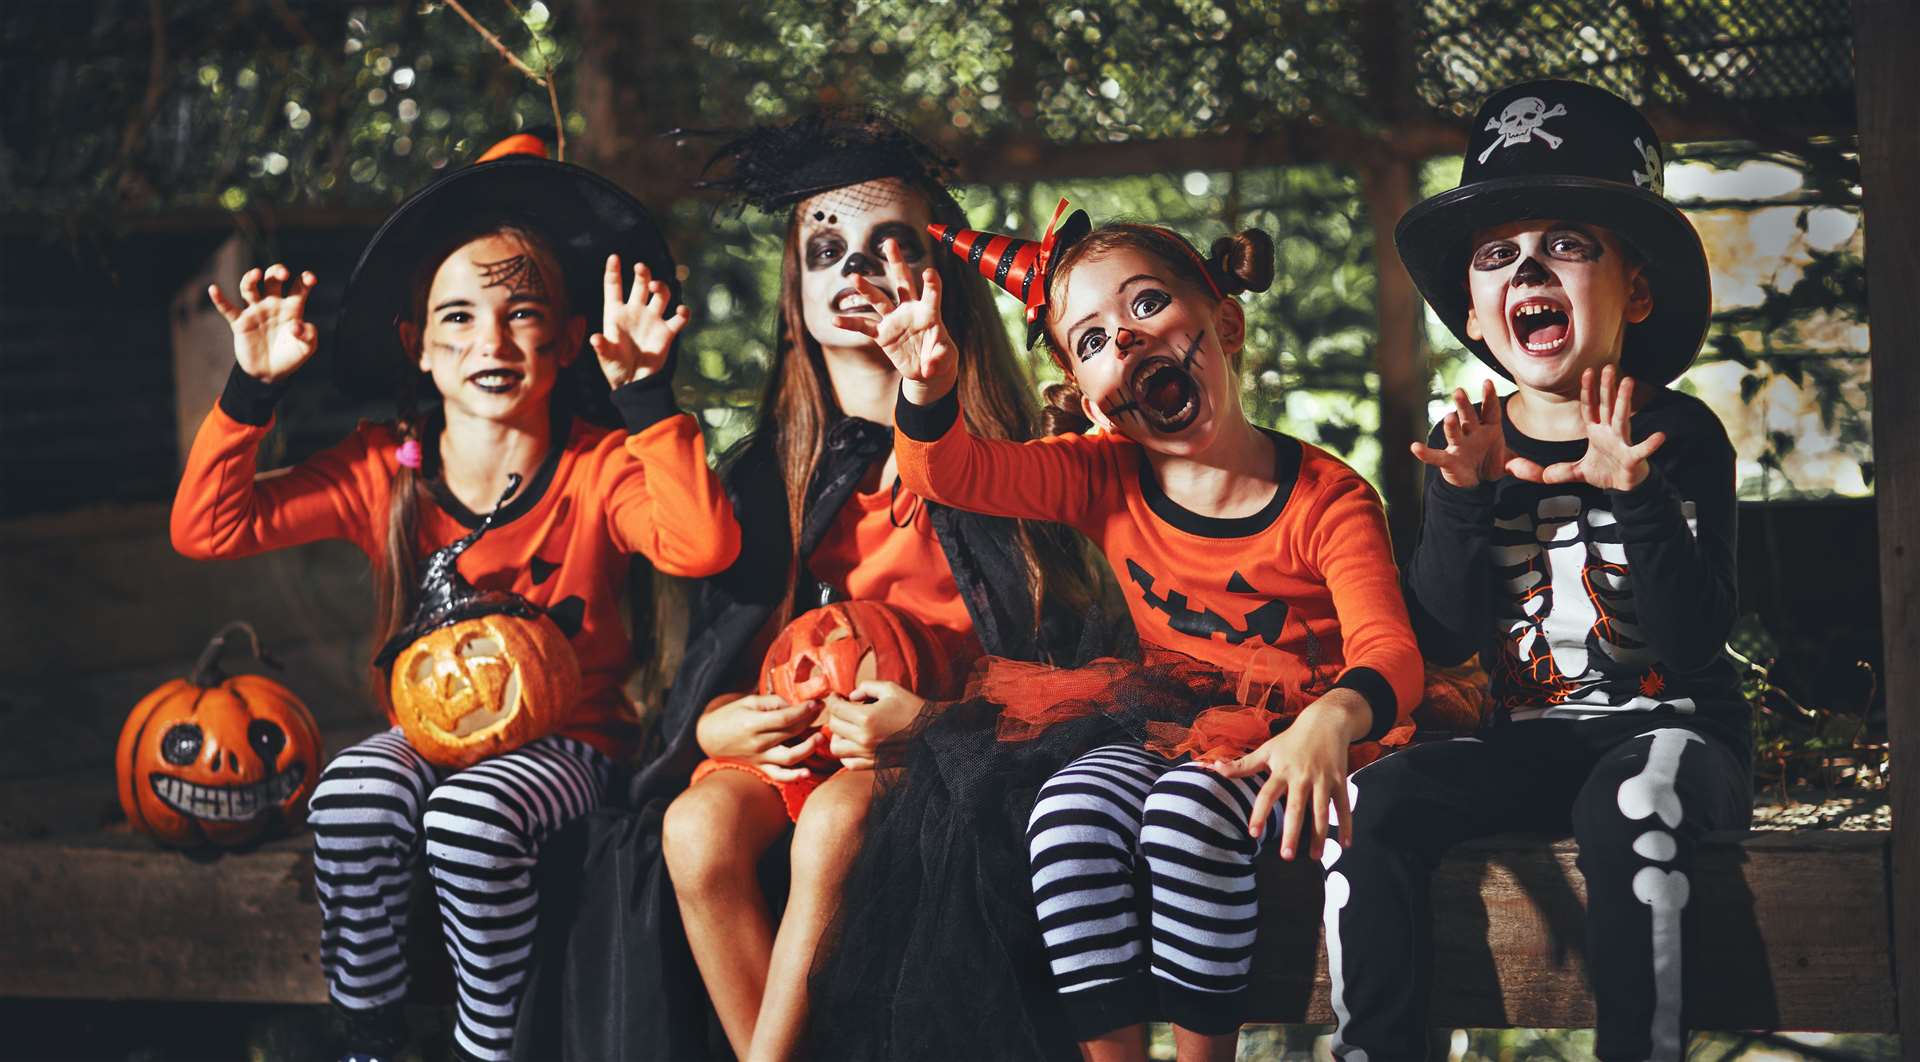 Kent County Council and Medway Council says trick or treating could put families at risk